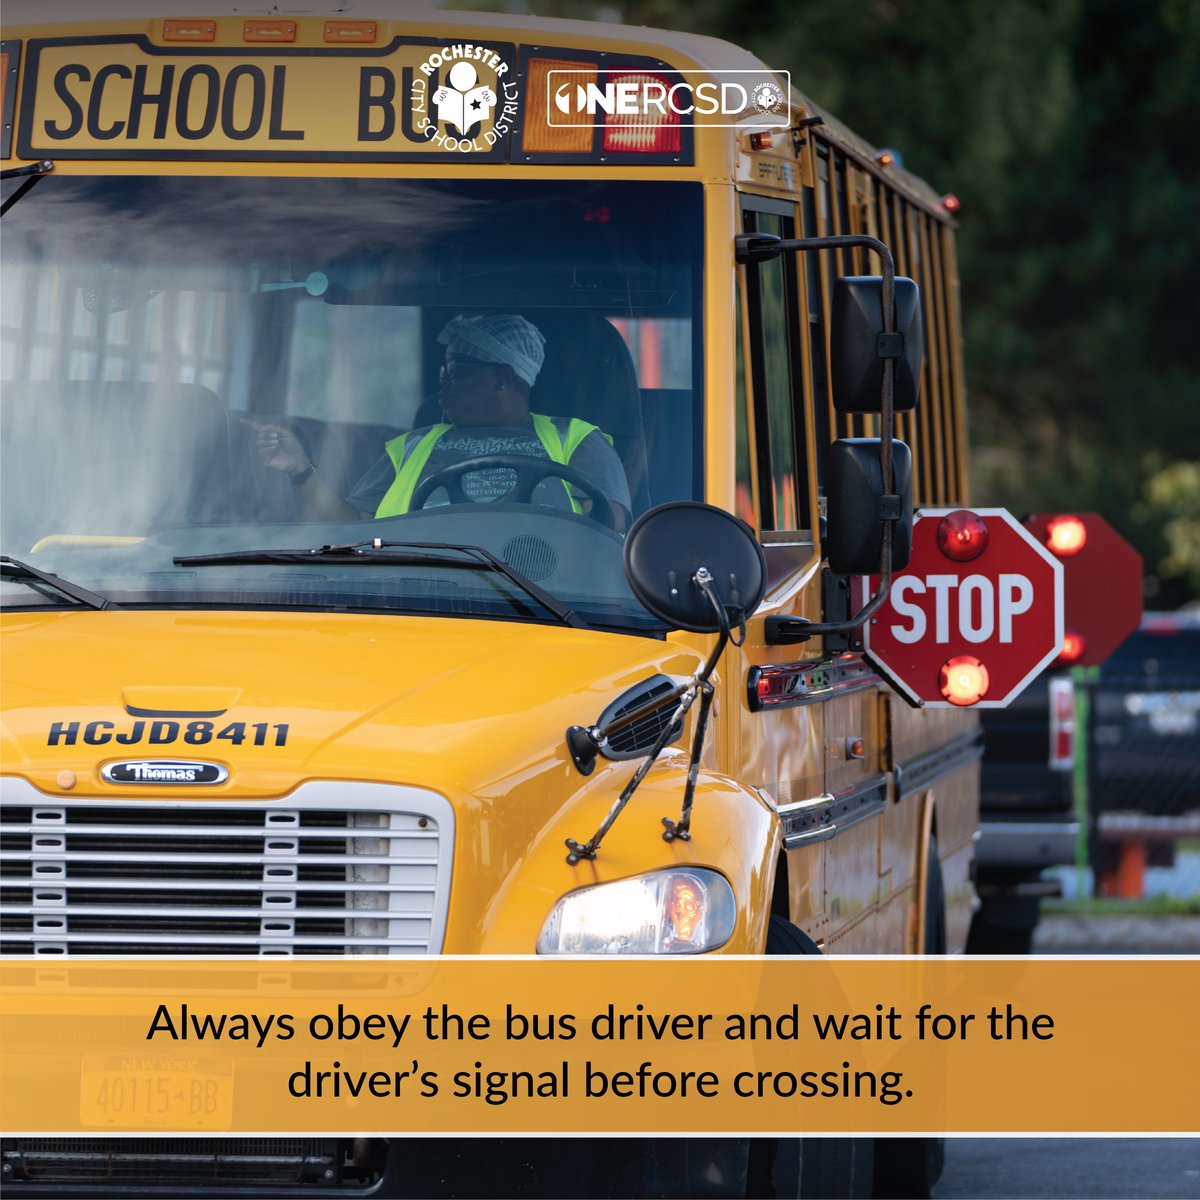 We're halfway through School Bus Safety Week! Today's tip: Always obey the bus driver and wait for the driver's signal before crossing. #ONERCSD #SchoolBusSafetyWeek